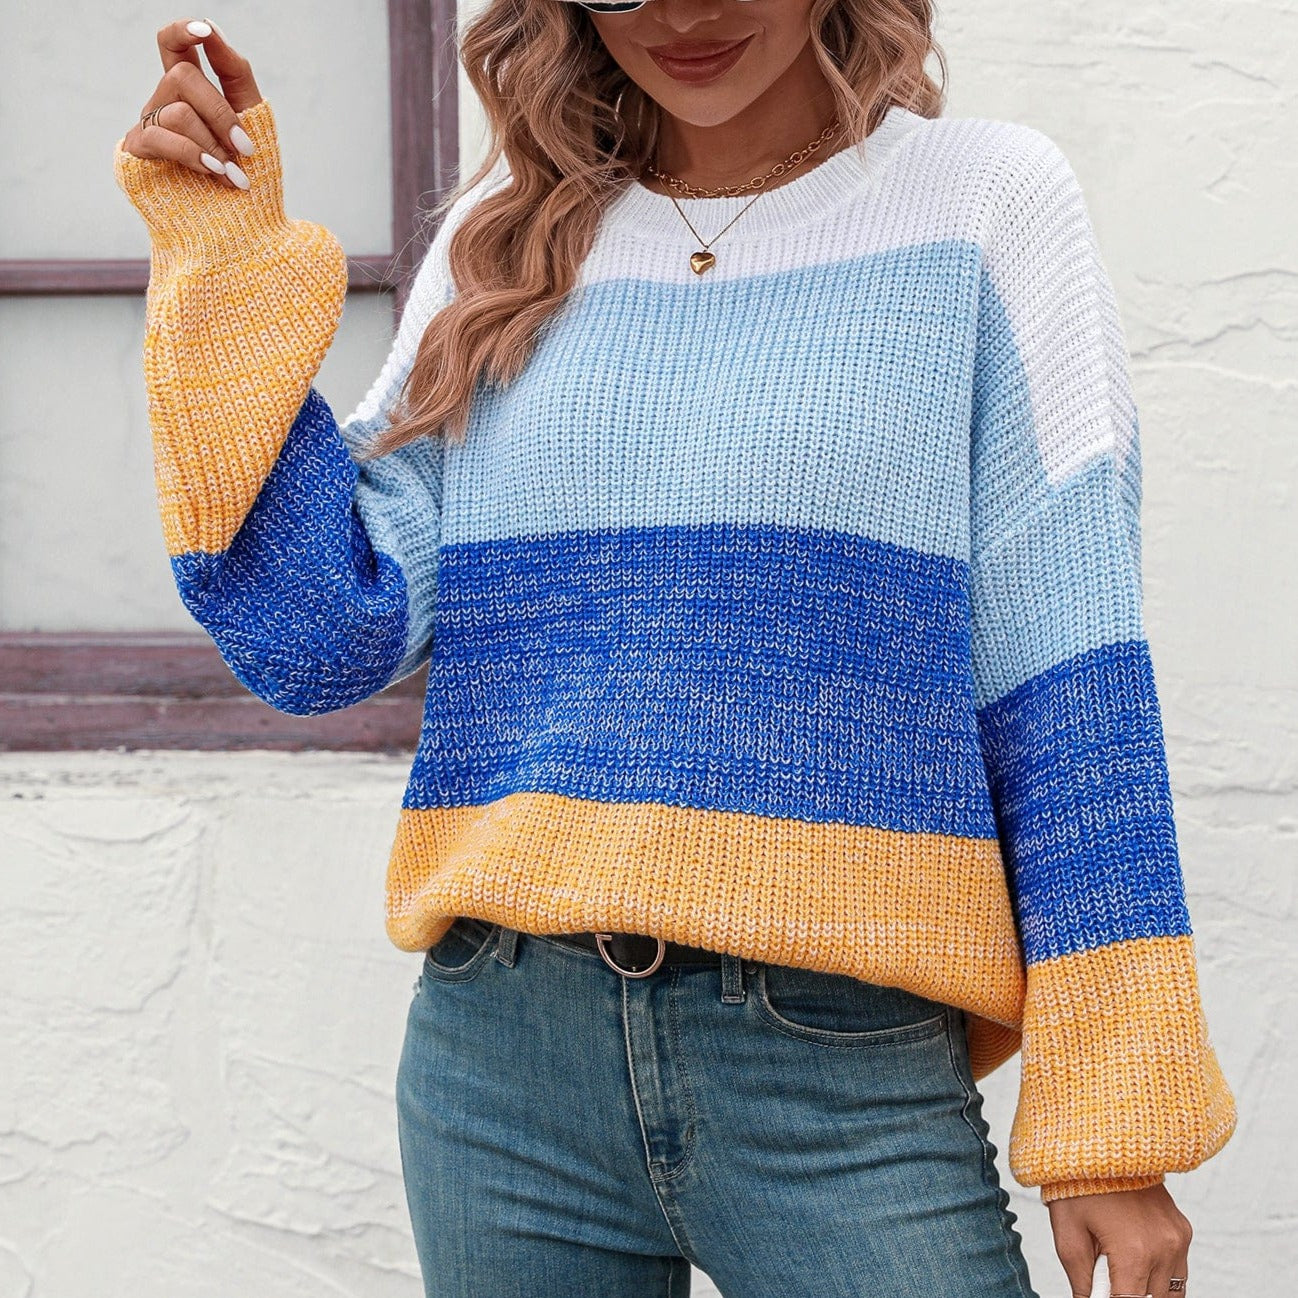 SERENDIPITY Endellion Knitted Sweater